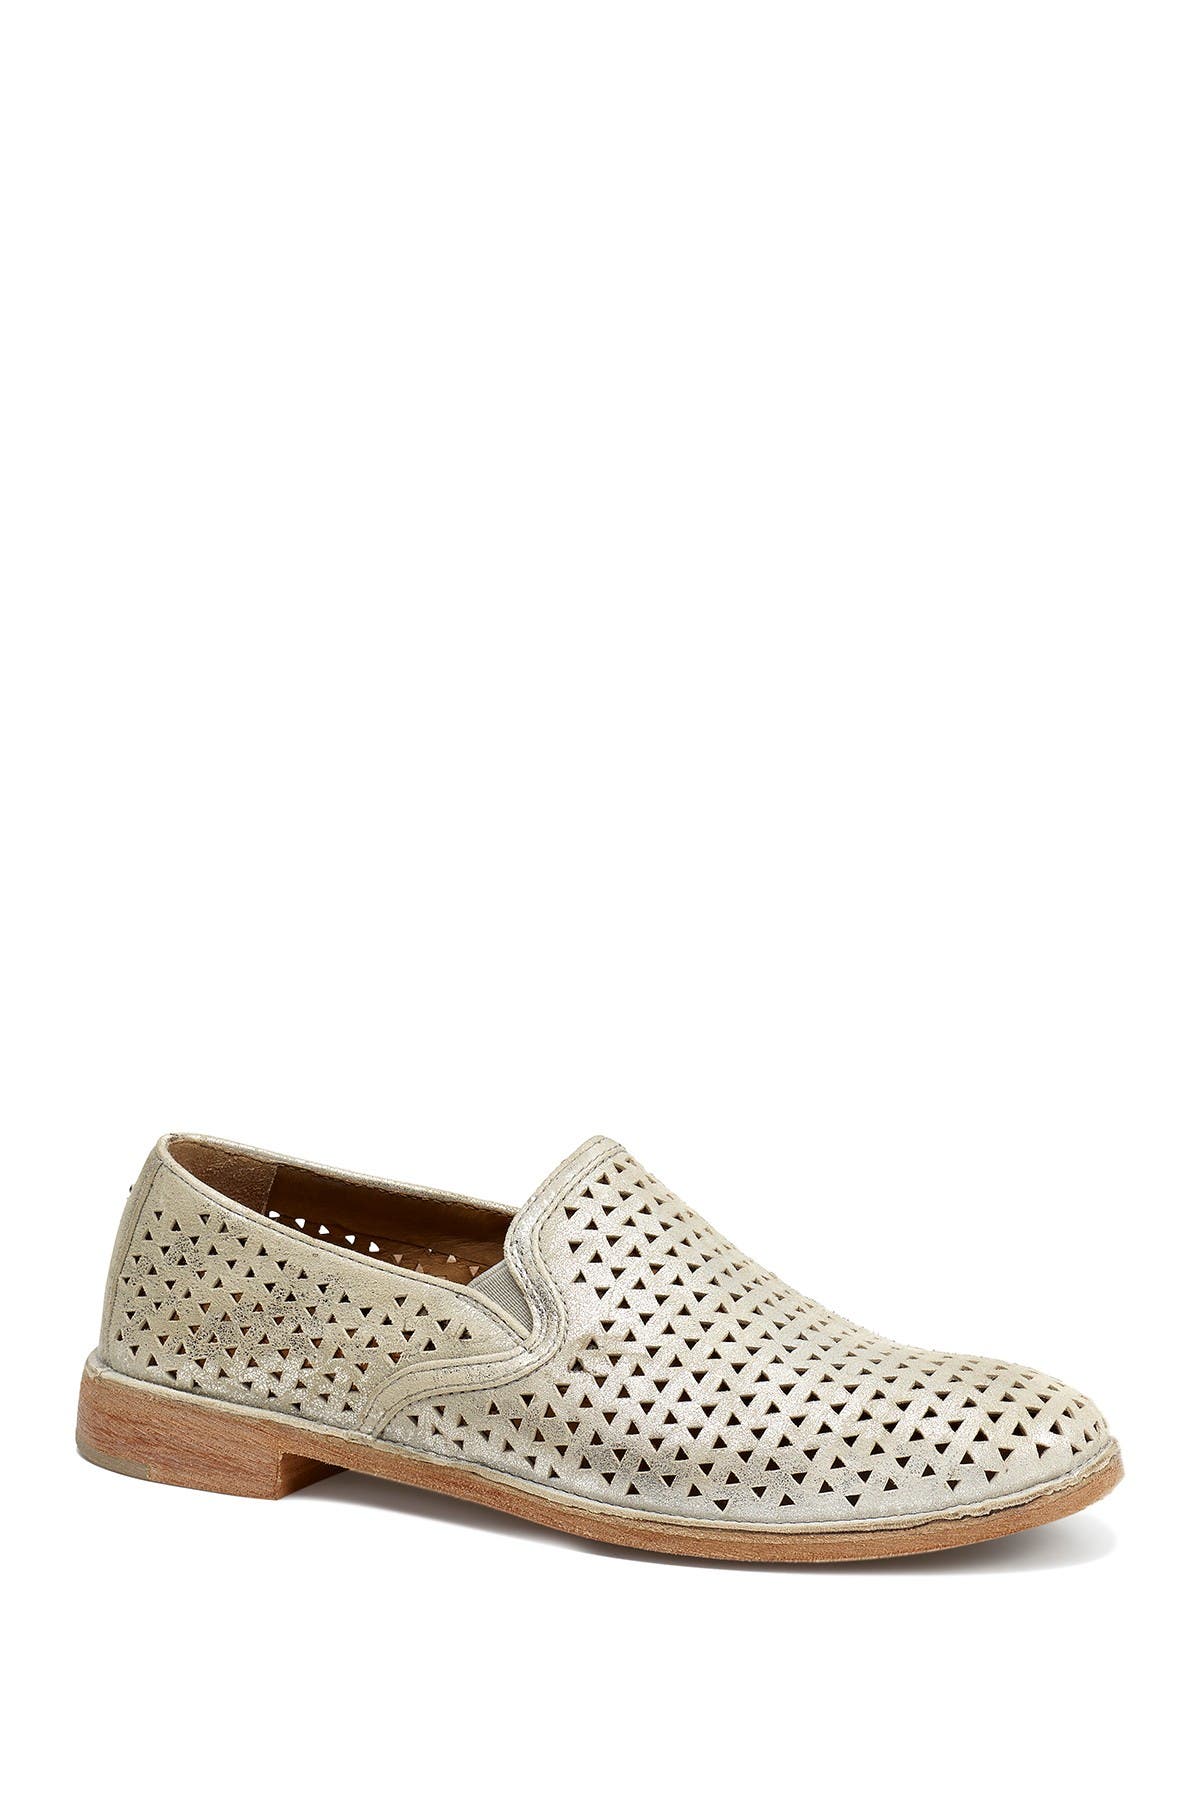 trask ali perforated loafer